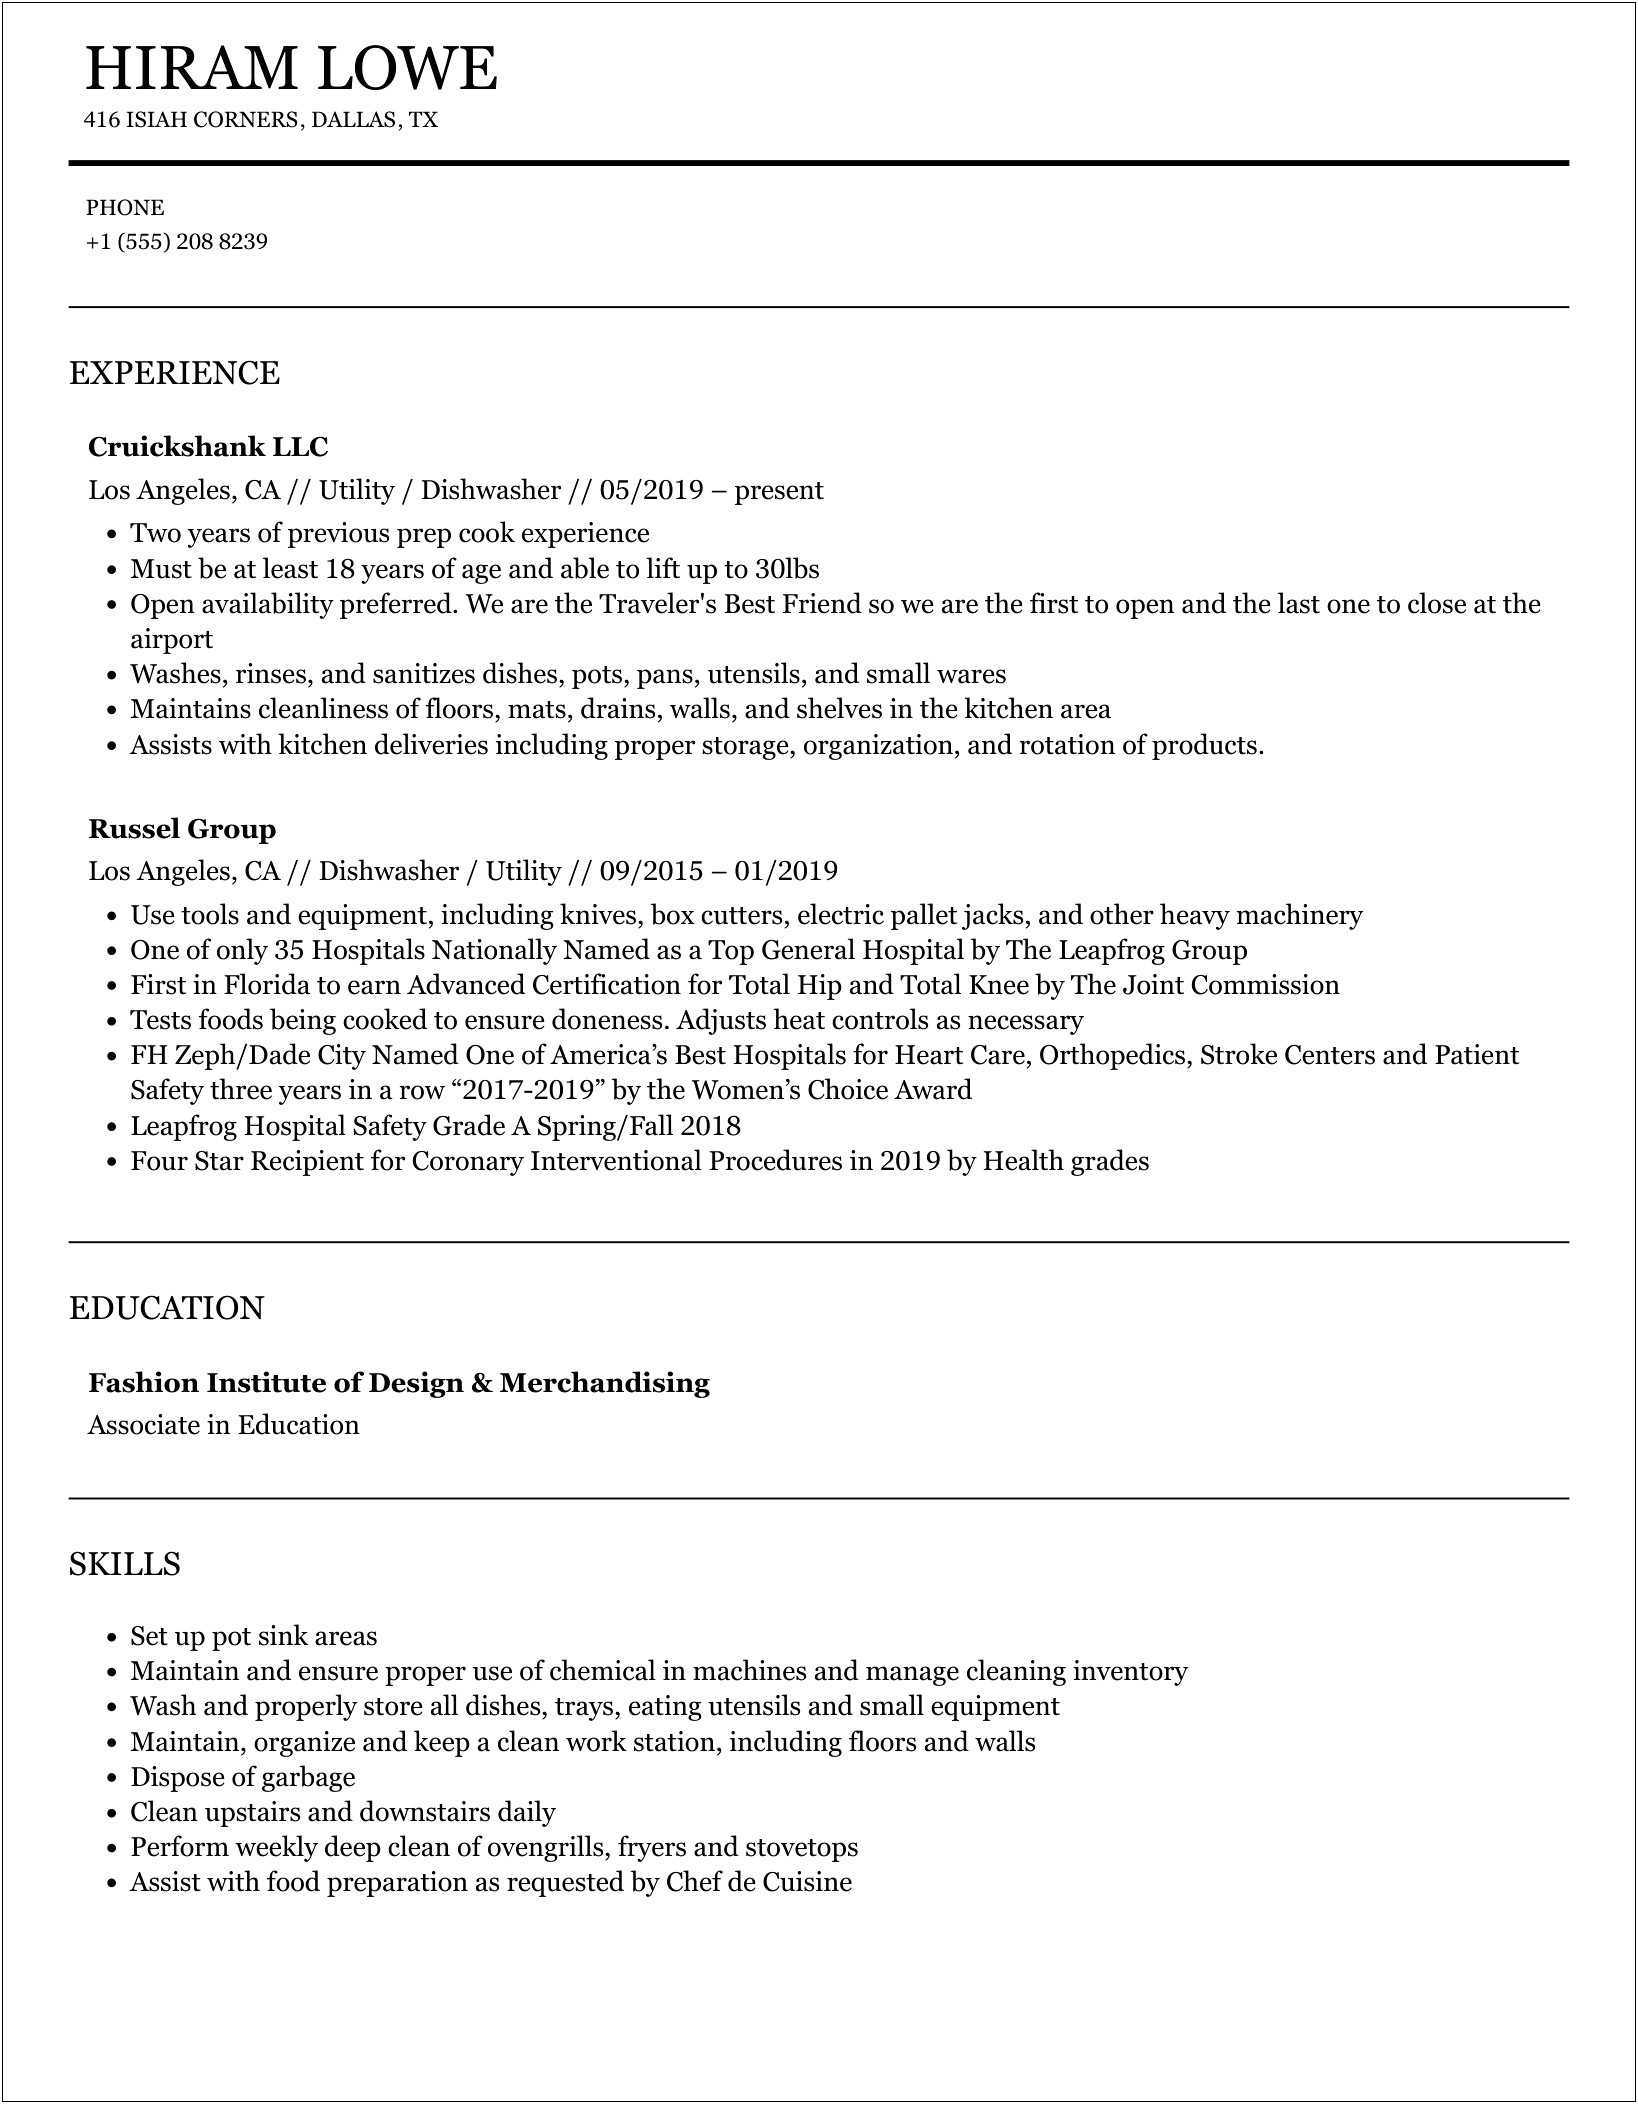 Skills To Write On Resume For Dishwasher Position